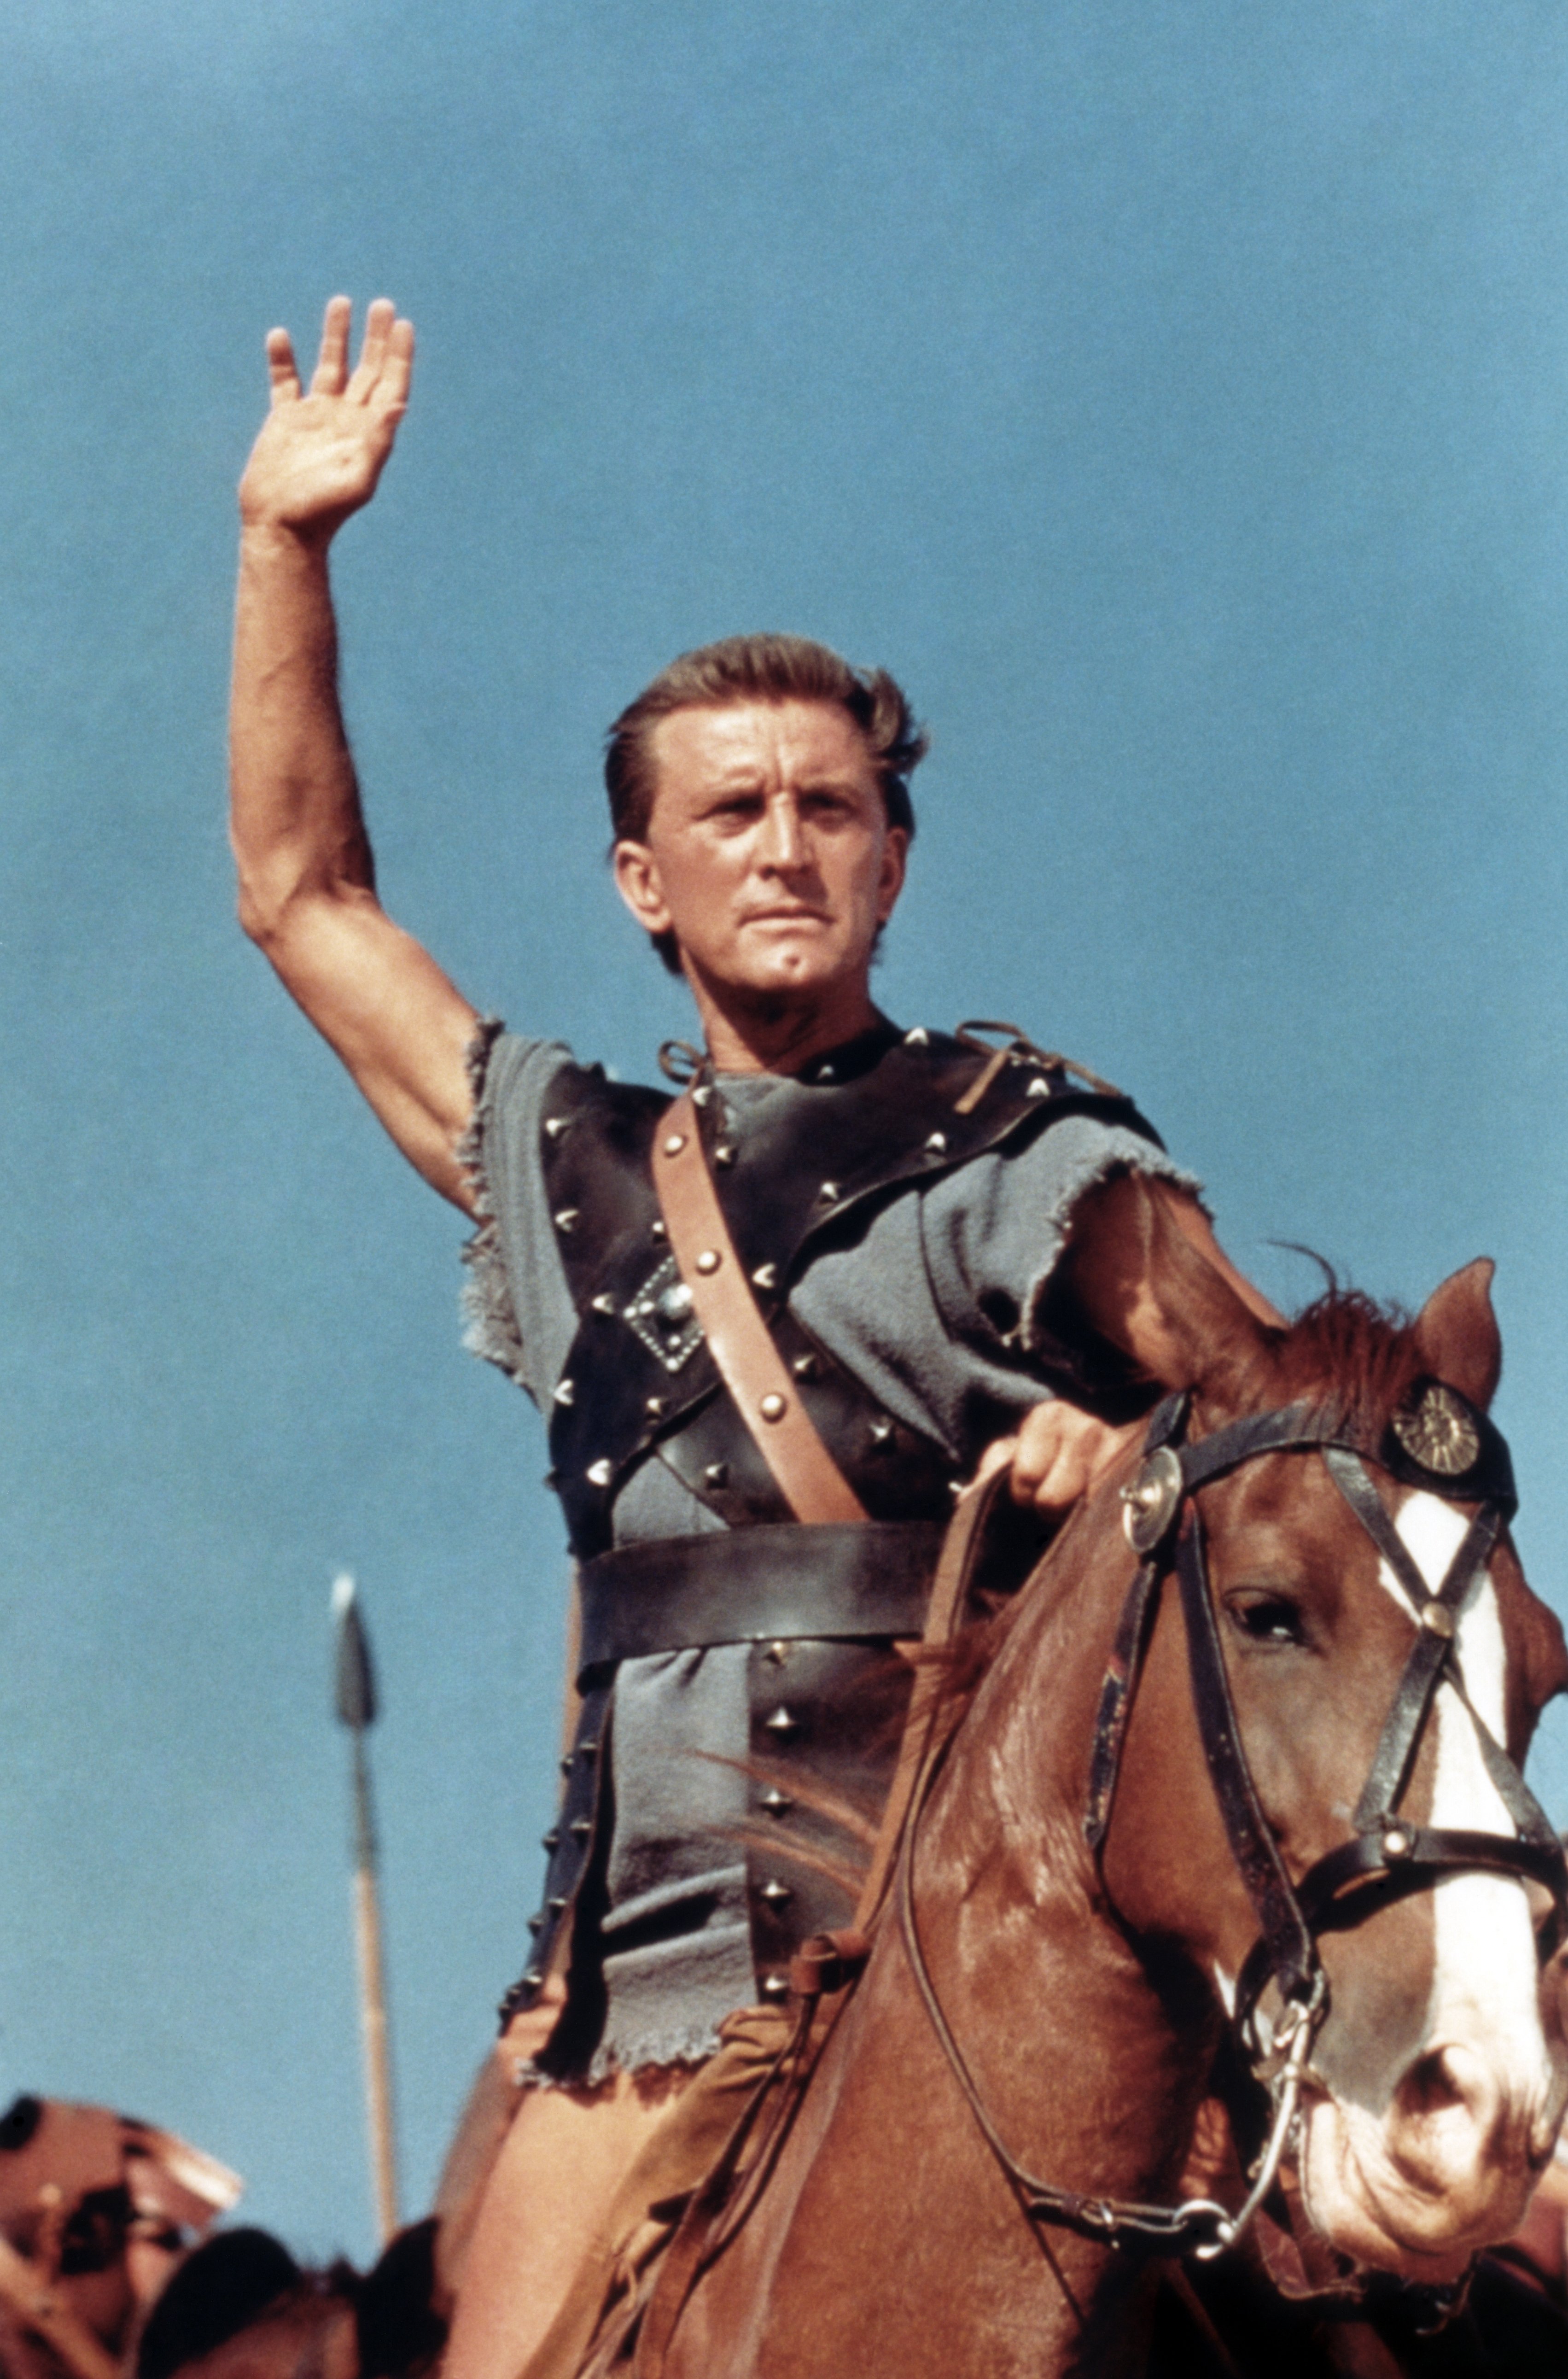 Kirk Douglas in the 1960 action film "Spartacus" pictured on top of a horse with his hand raised in the air. / Source: Getty Images